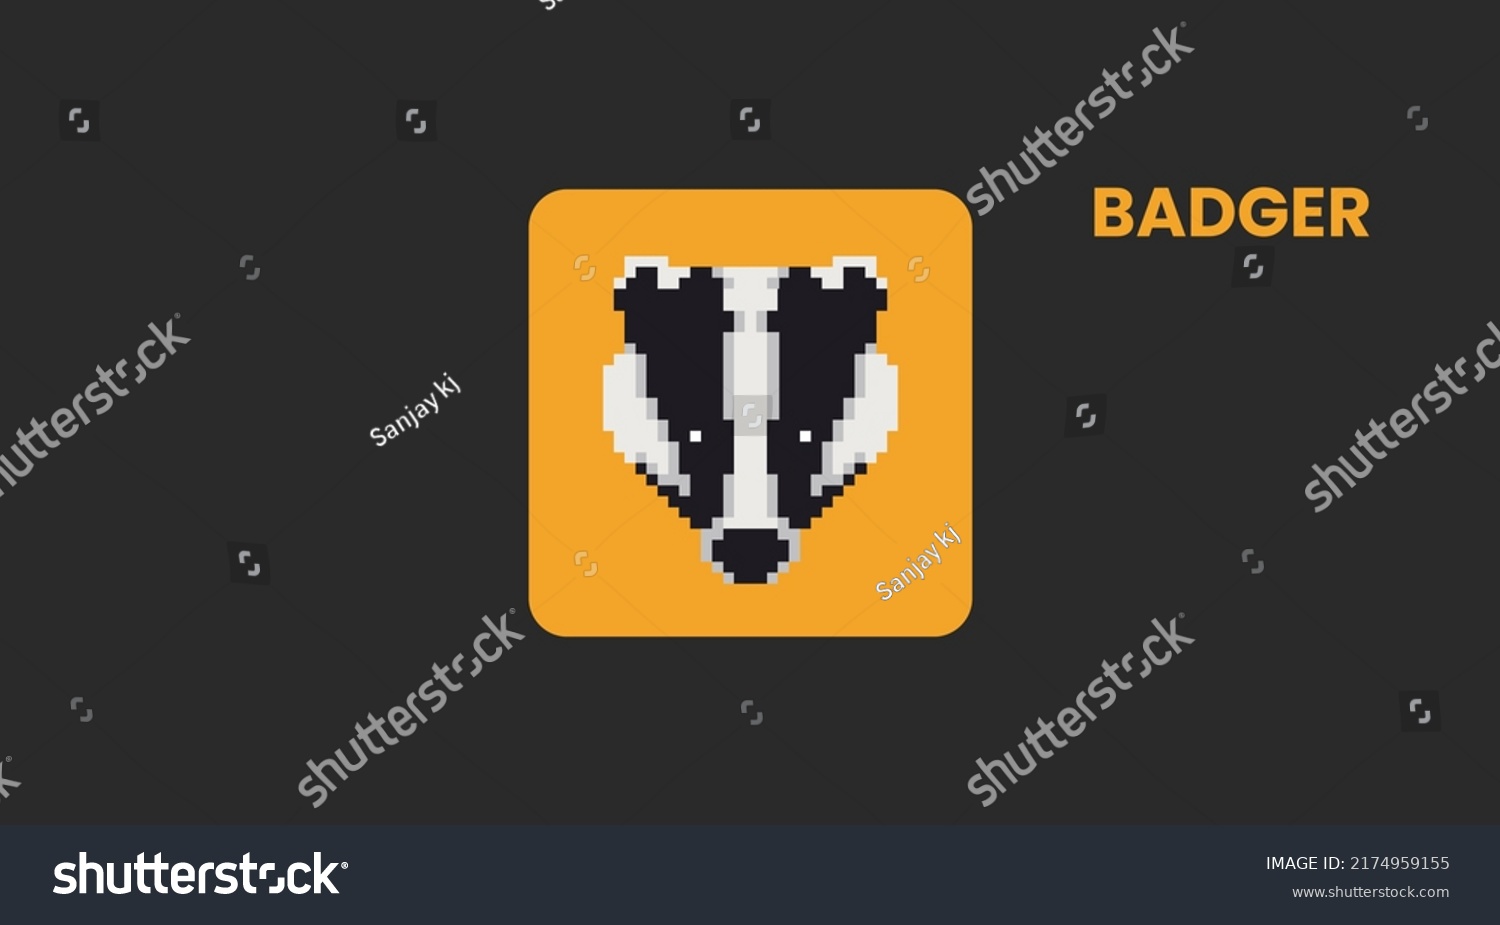 SVG of Badger dao, Badger token cryptocurrency logo on isolated background with copy space. vector illustration of Badger token banner design concept. svg